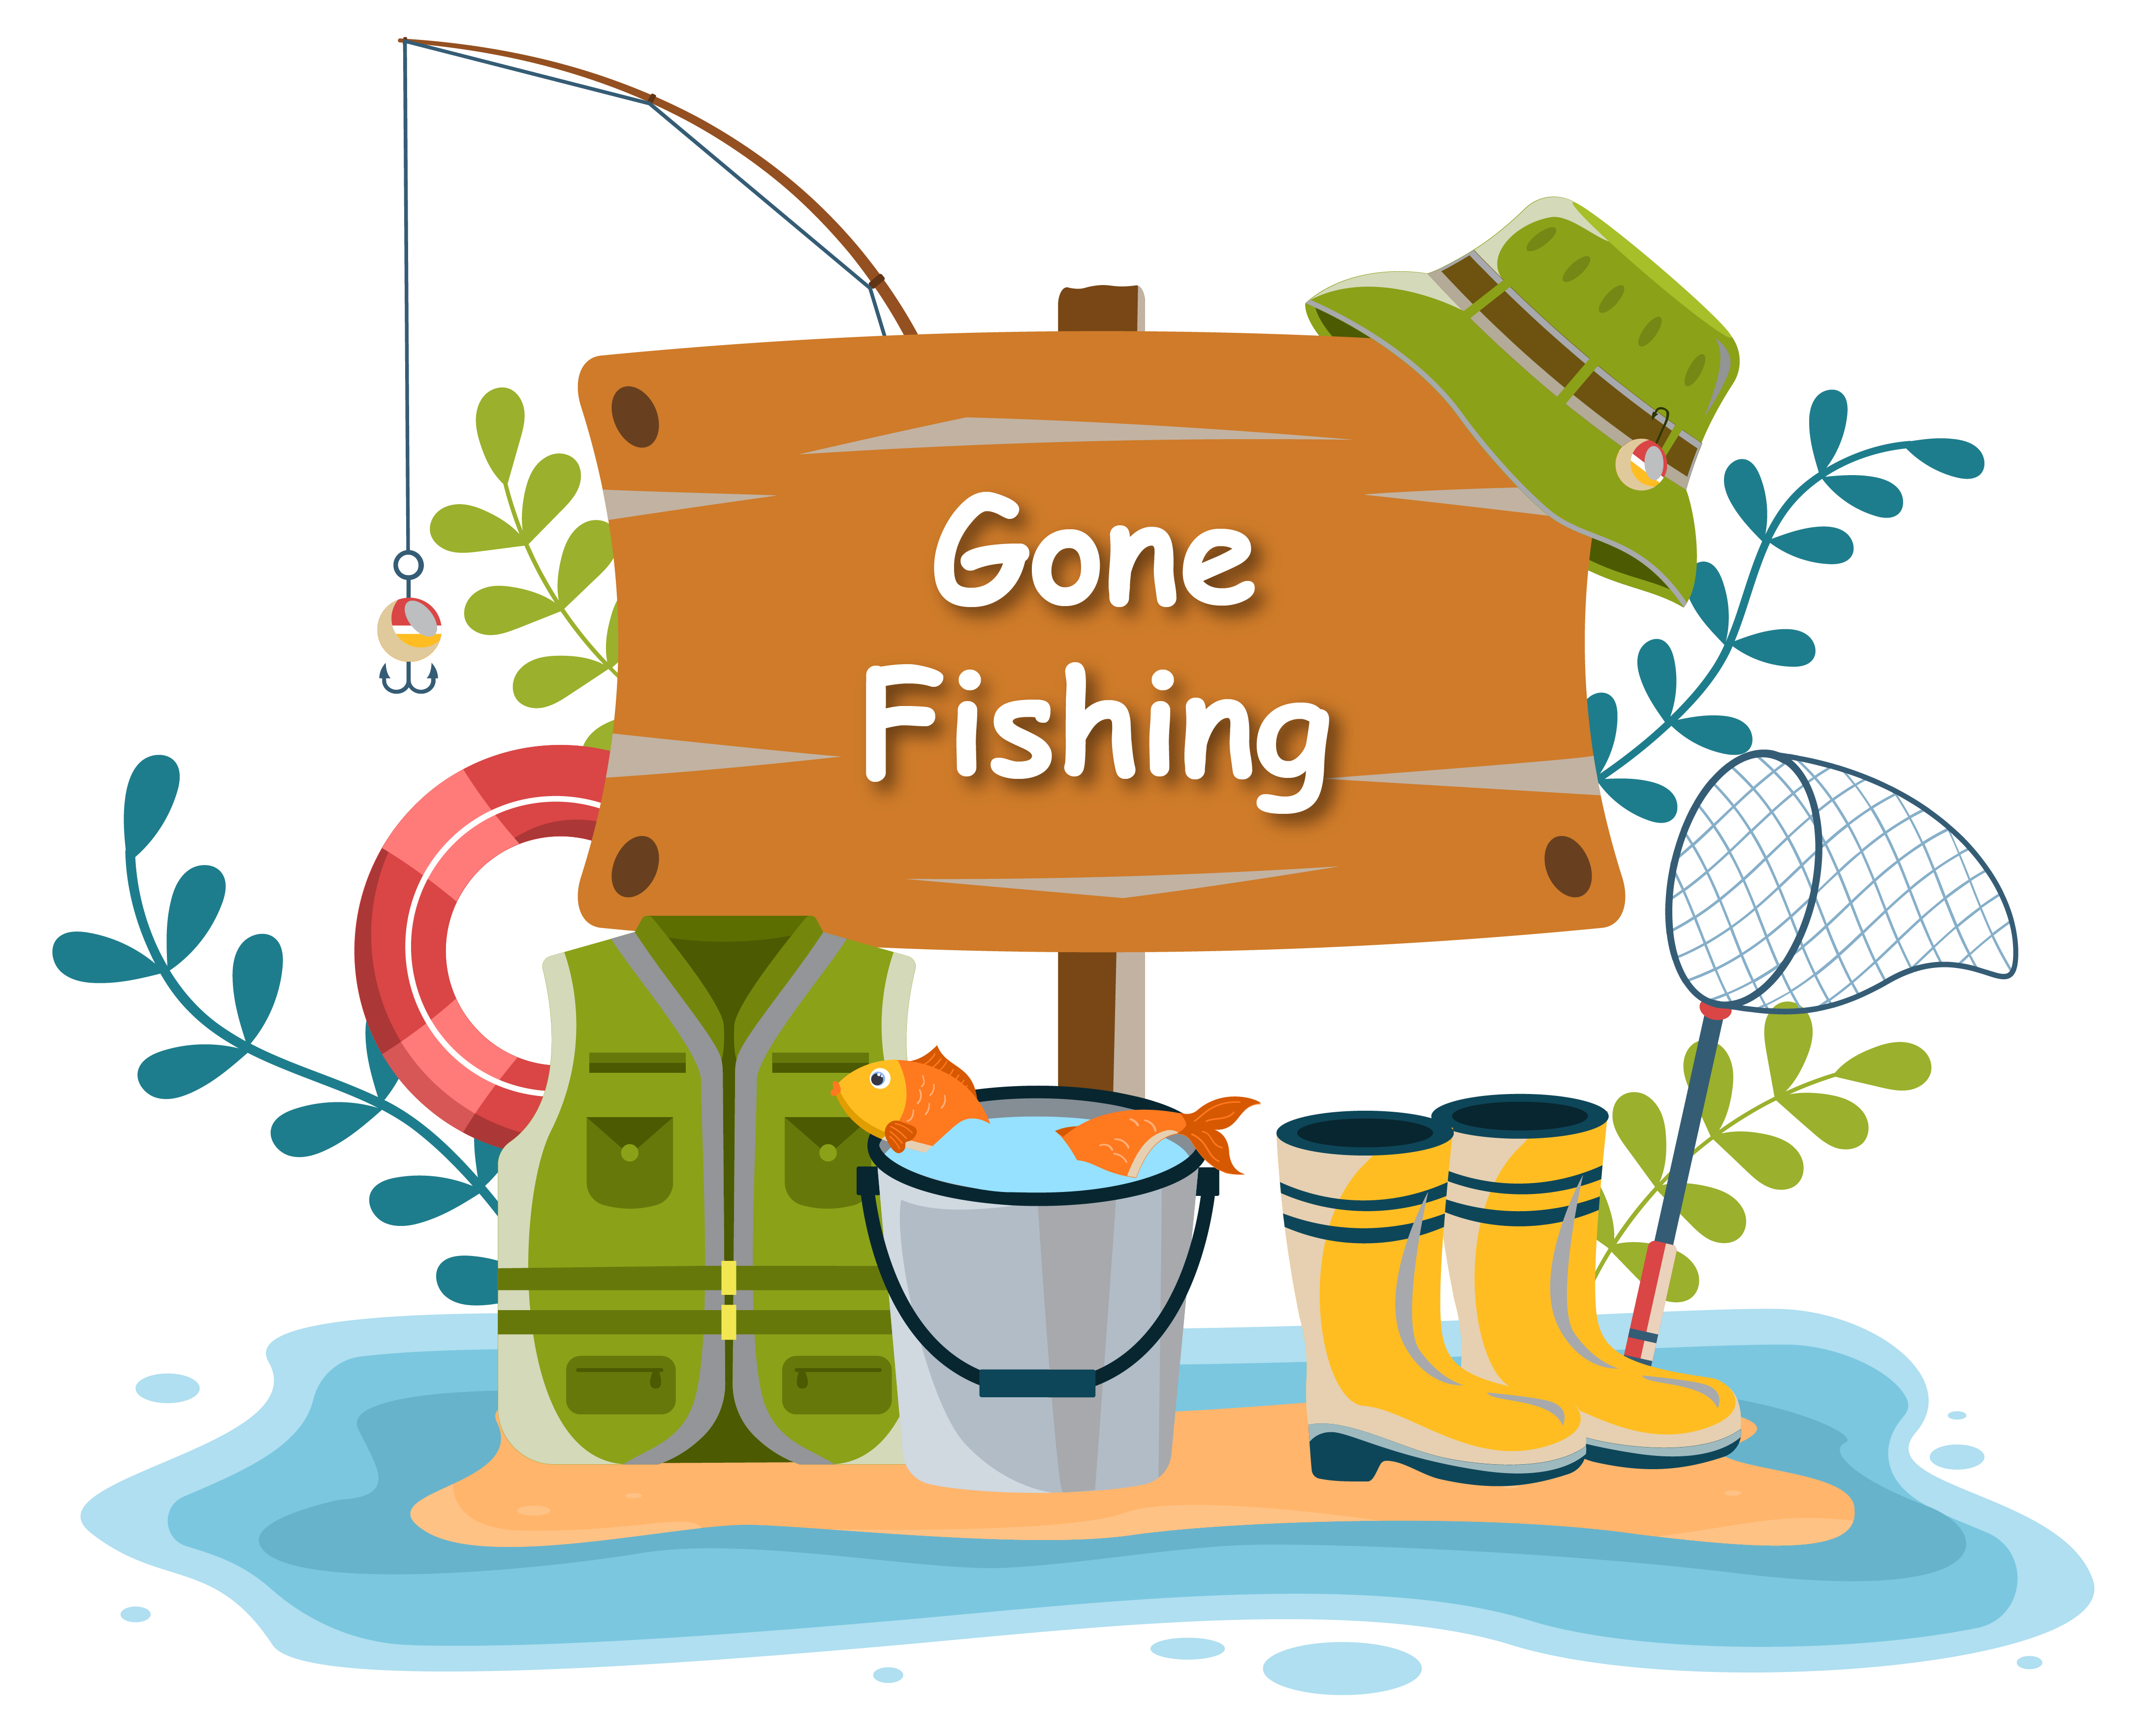 Gone Fishing sign and fishing gear